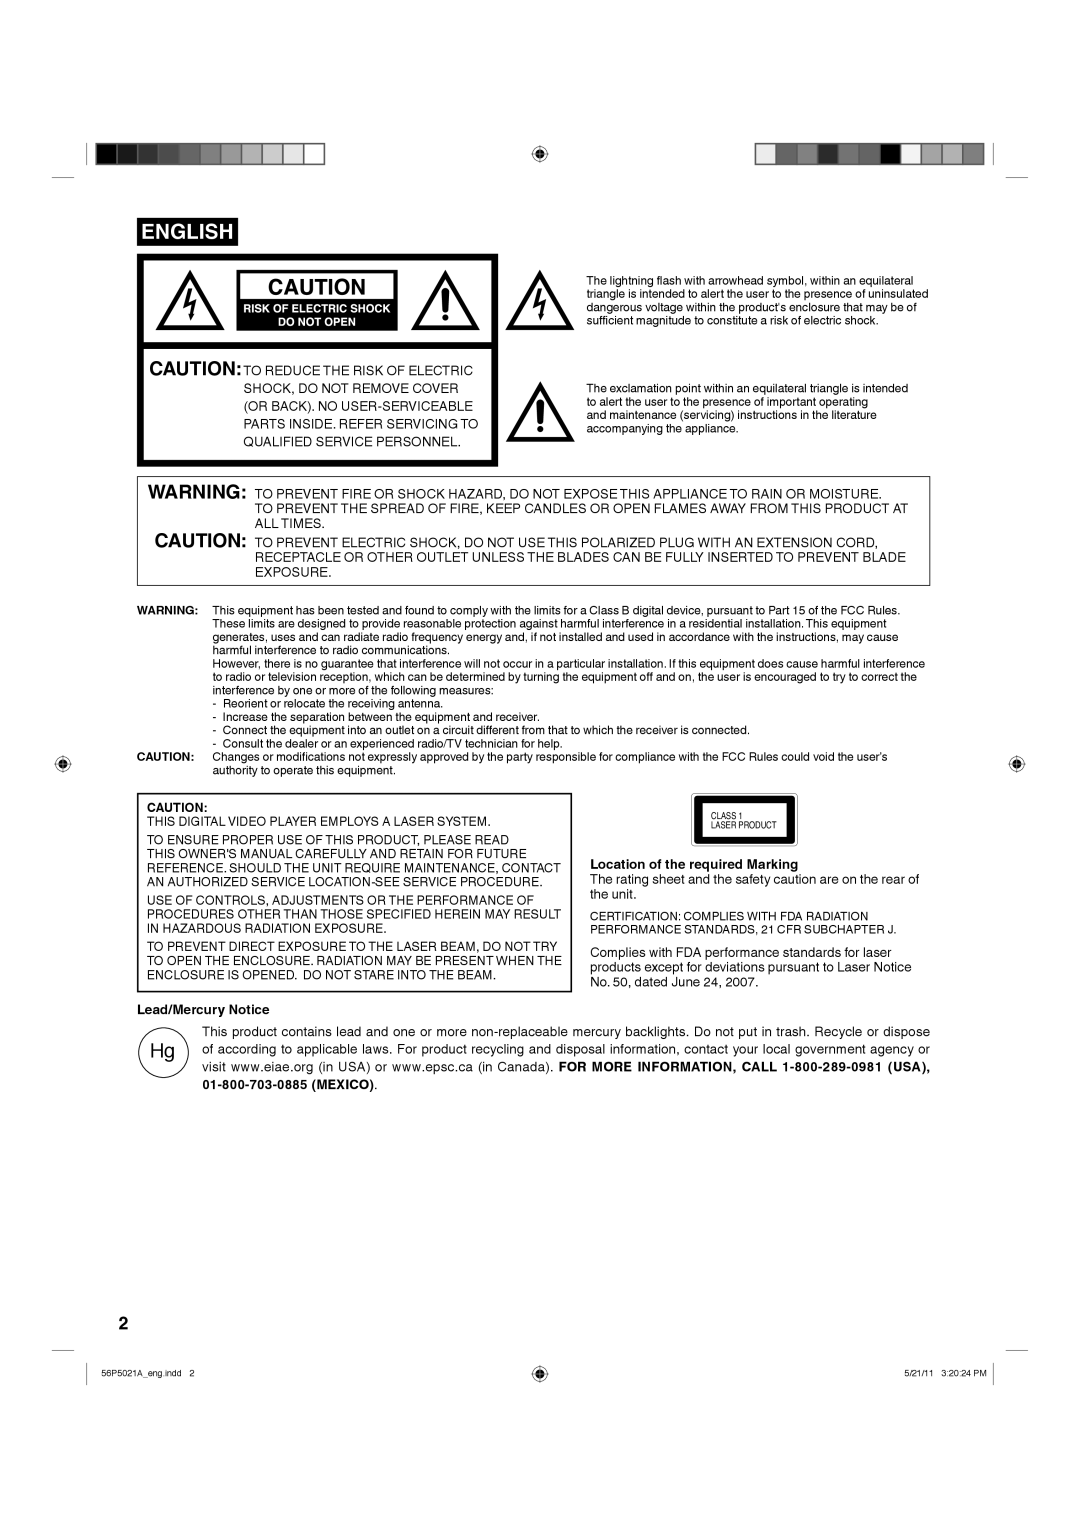 Hitachi L26D205 important safety instructions English, Lead/Mercury Notice, Location of the required Marking, Mexico 